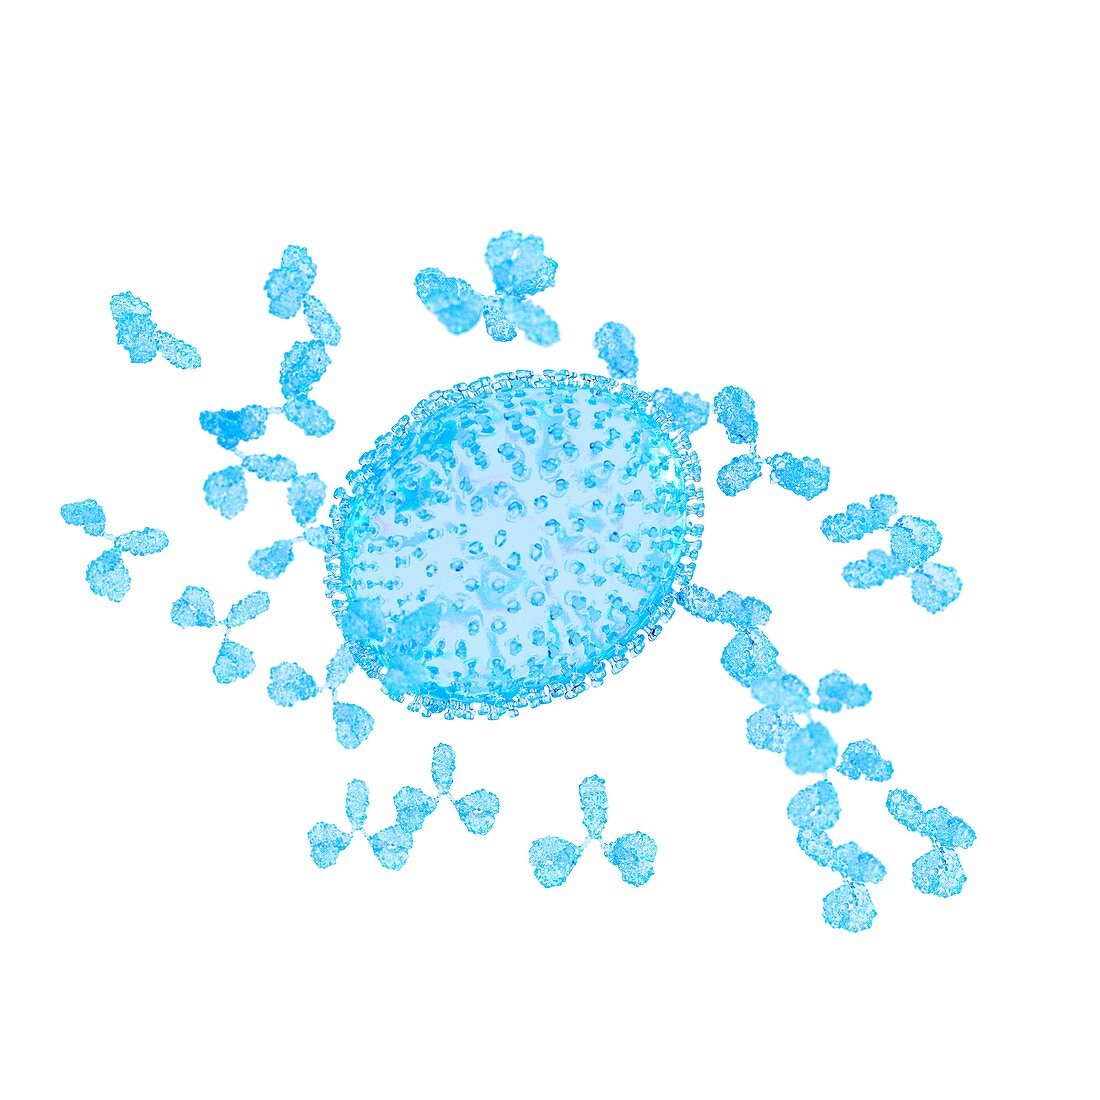 Illustration of an influenza virus being attacked by antibod